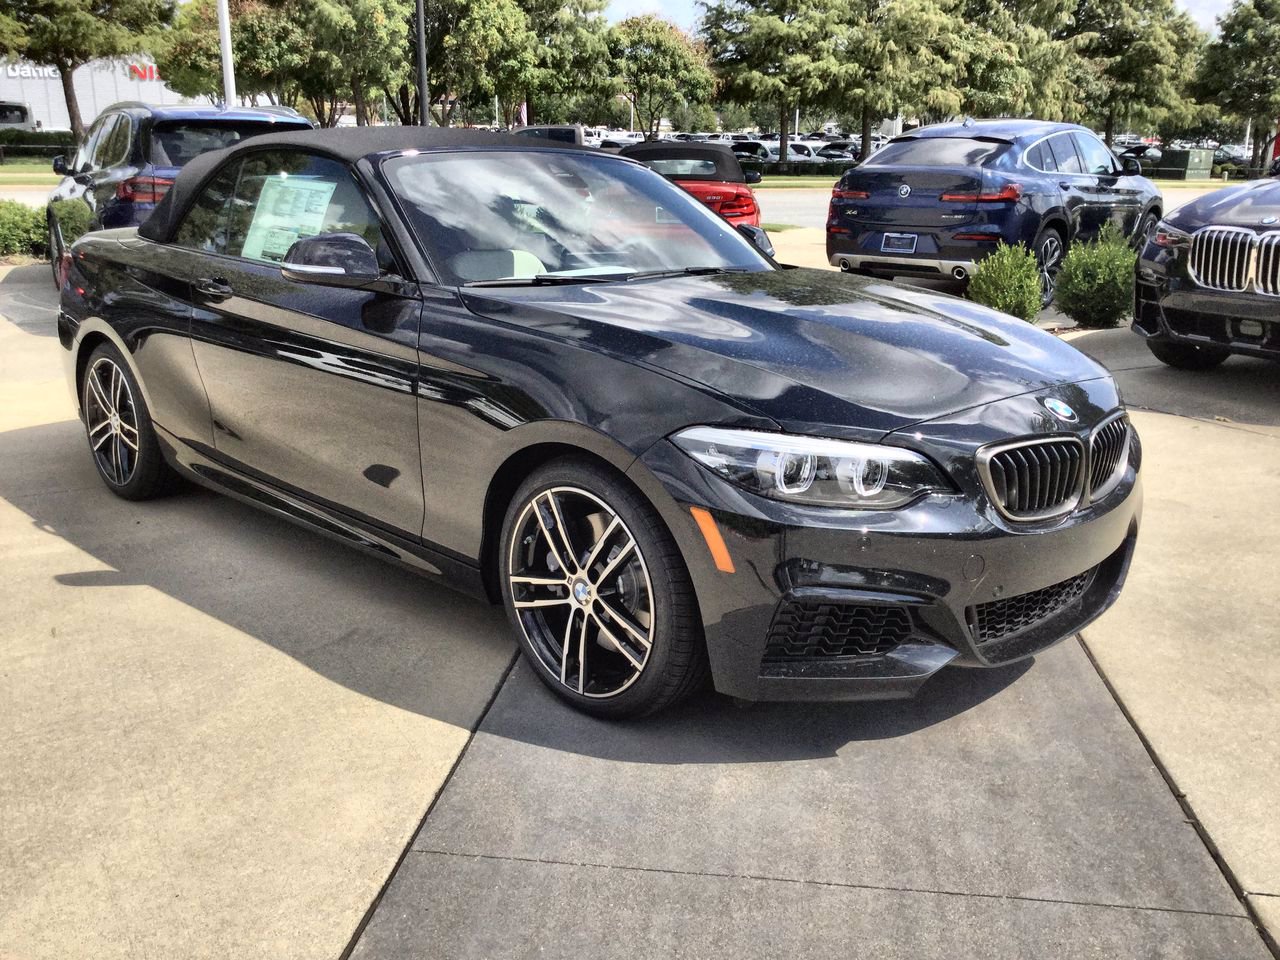 New 2020 Bmw 2 Series M240i Xdrive Convertible In Fayetteville We48351 1396